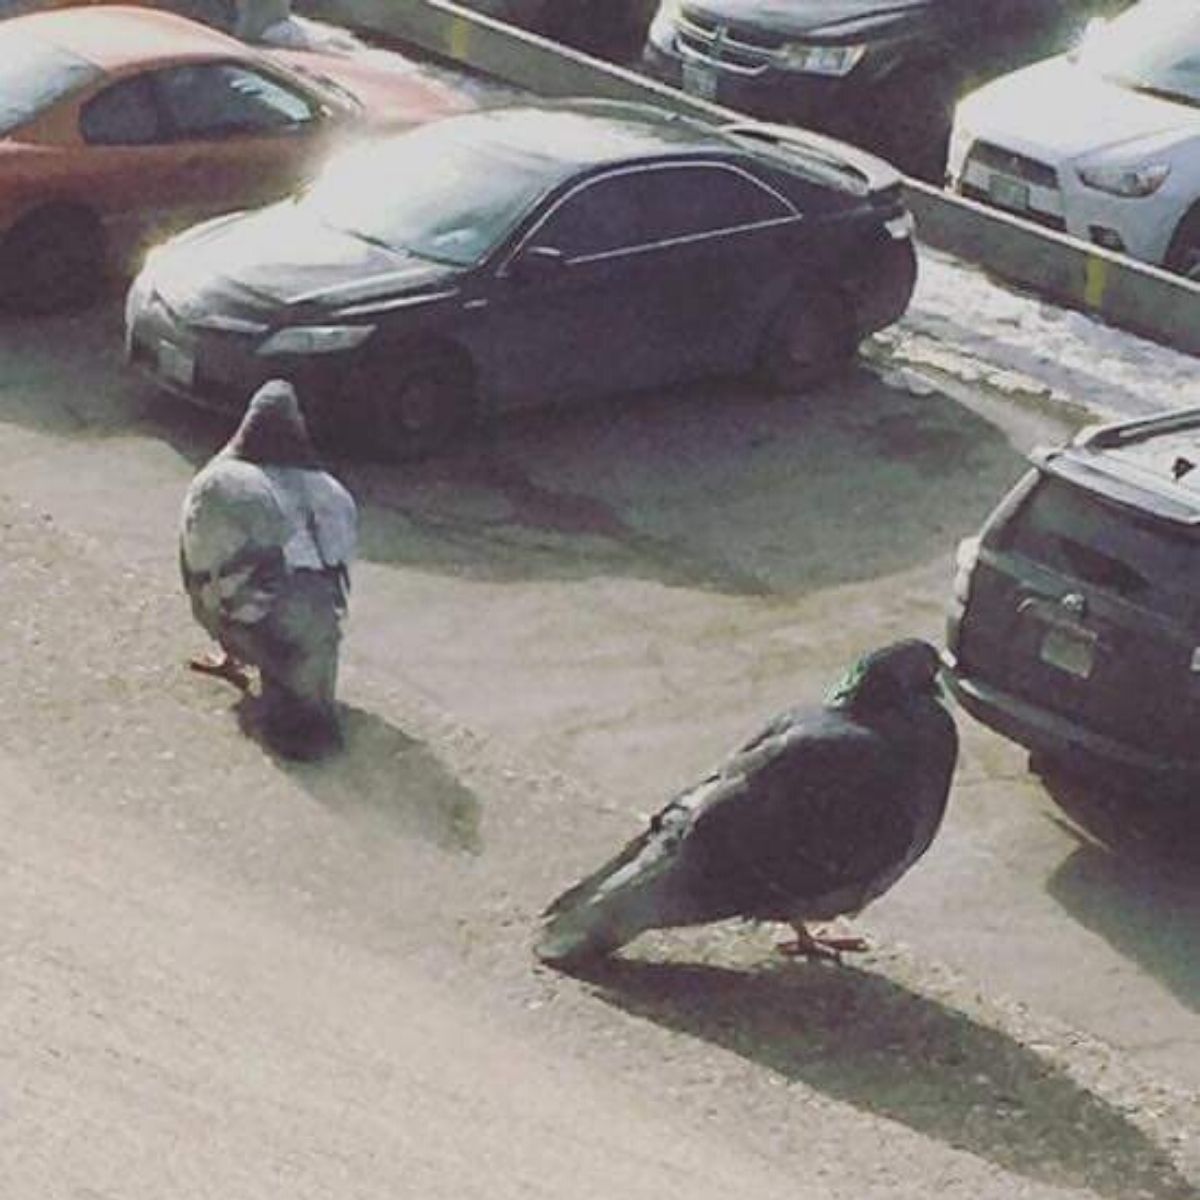 birds trying to find where they parked the car